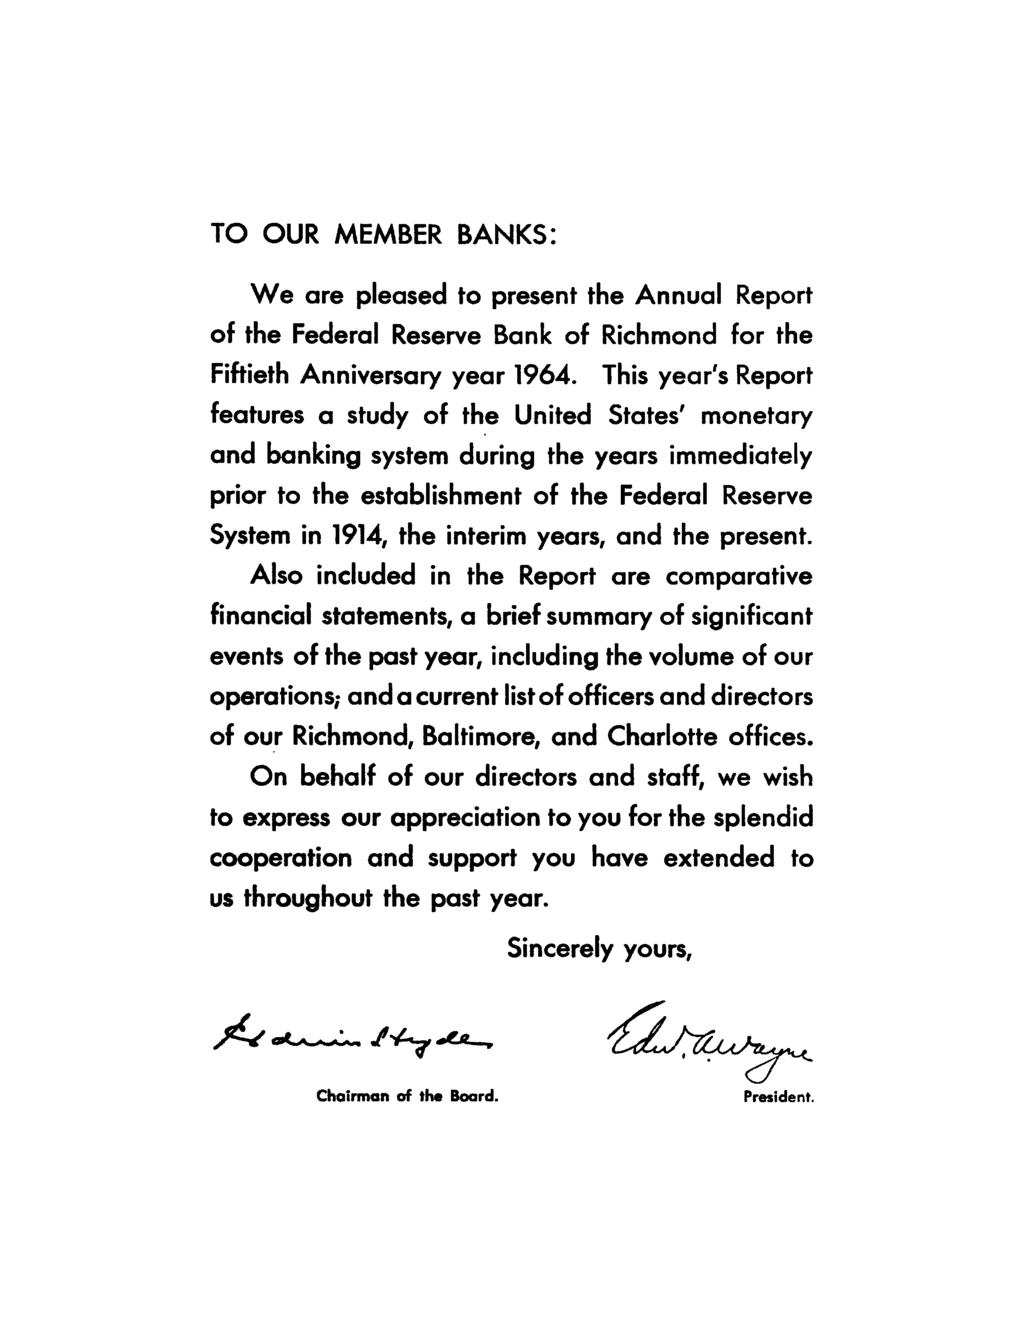 TO OUR MEMBER BANKS: We are pleased to present the Annual Report of the Federal Reserve Bank of Richmond for the Fiftieth Anniversary year 1964.